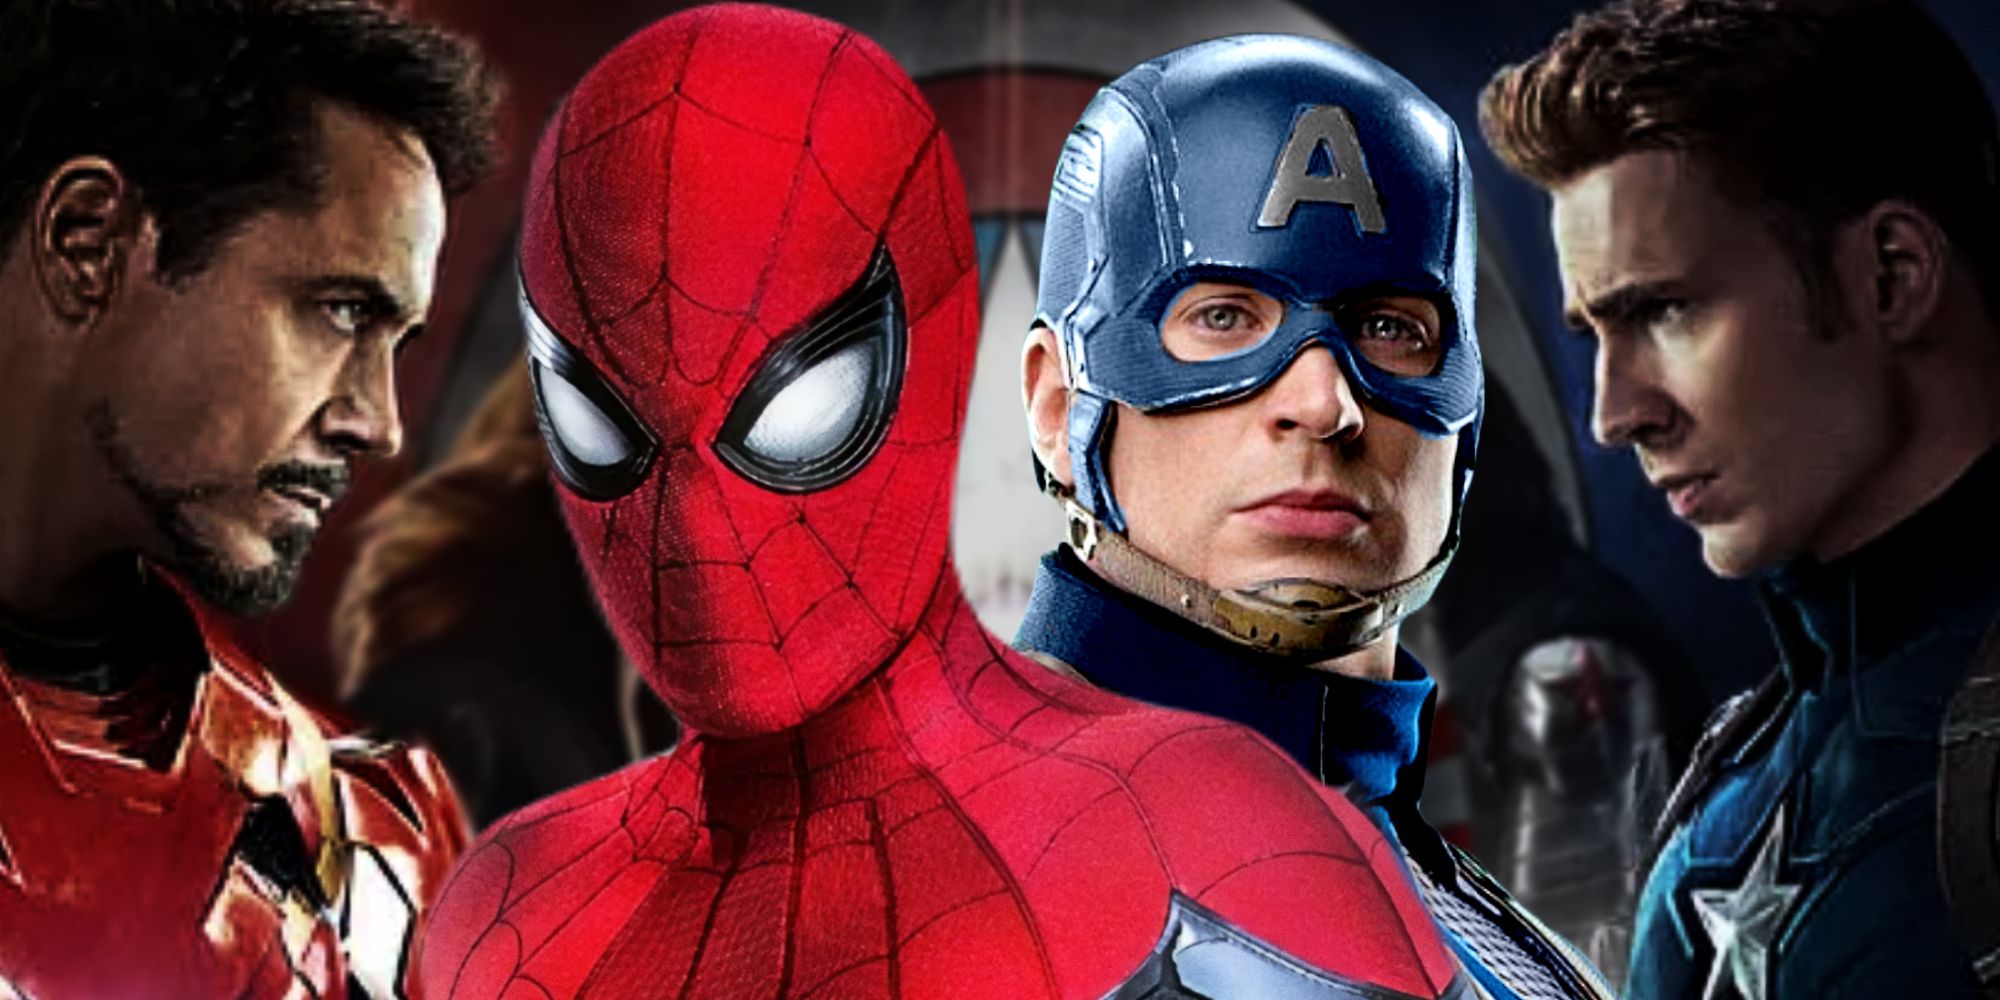 Spider-Man and Captain America in Civil War MCU Crossover Event